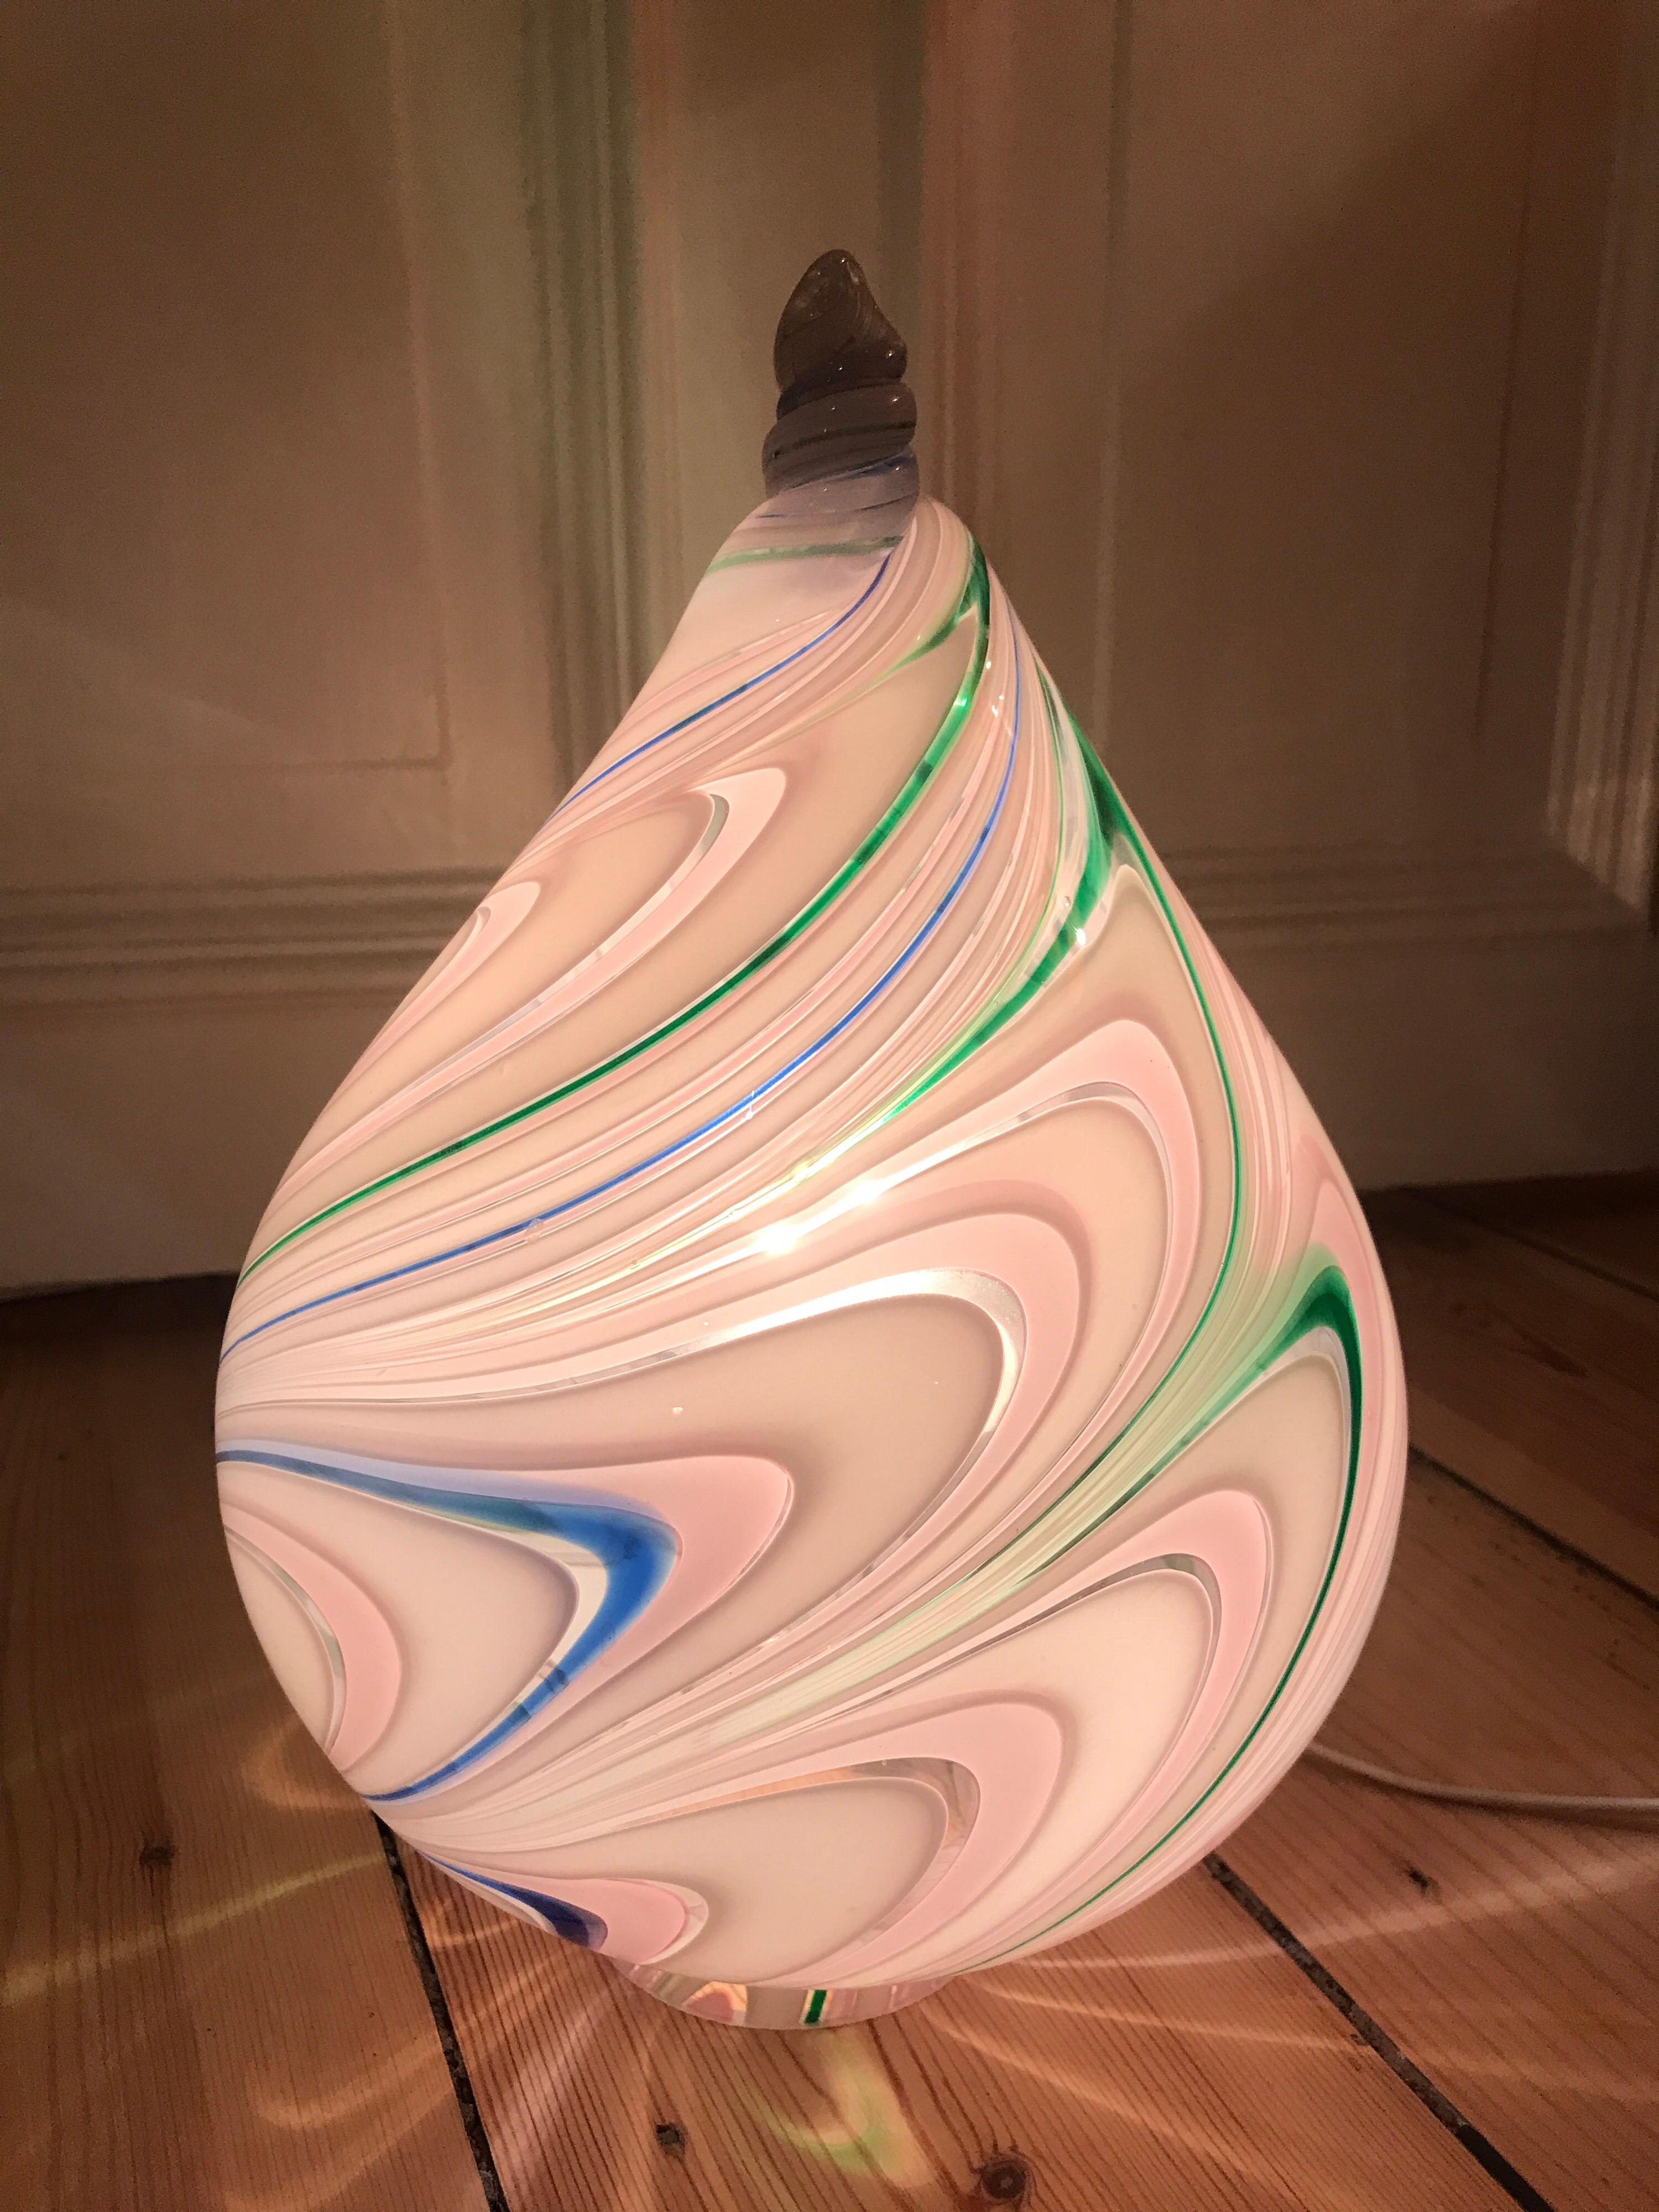 Murano swirl table lamp from the 1970s 
Blue, pink, and green striped murano table lamp.